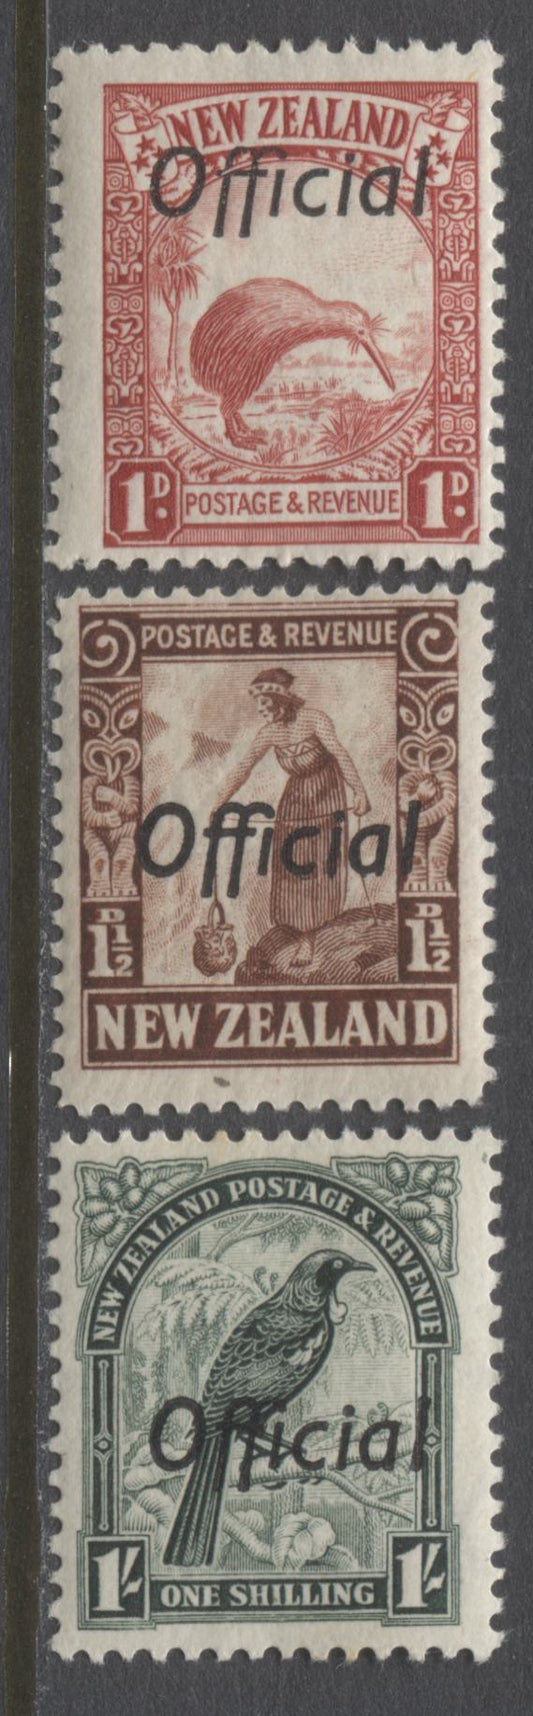 Lot 90 New Zealand SG#O115-O118 1936-1961 Pictorial Issue With Official Overprint, A Partial Fine NH and VFNH Set. Single NZ + Star Wmk, Multiple Perfs, SG. Cat. 100 GBP = $172.00